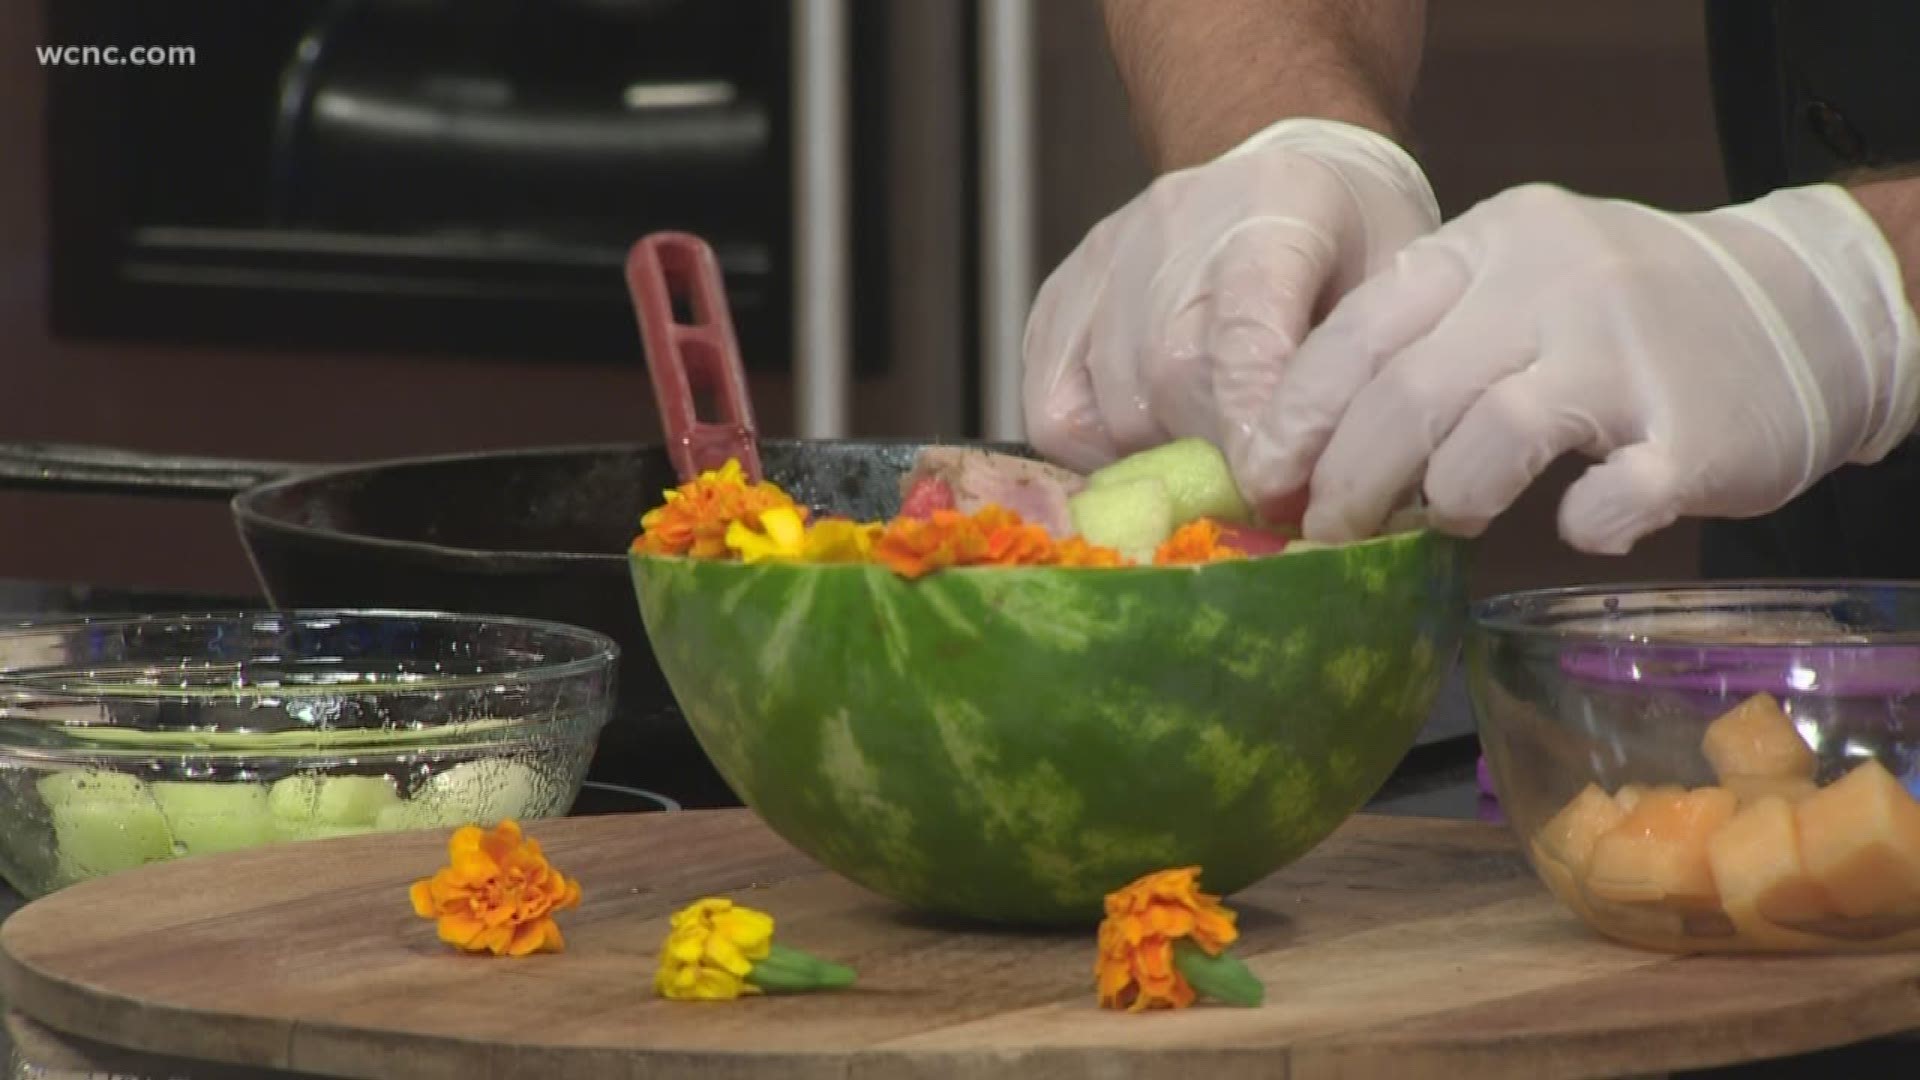 Chef Blake Mitkoff of Inside Chef gives us a refreshing summer salad recipe that pairs perfectly with seared tuna.